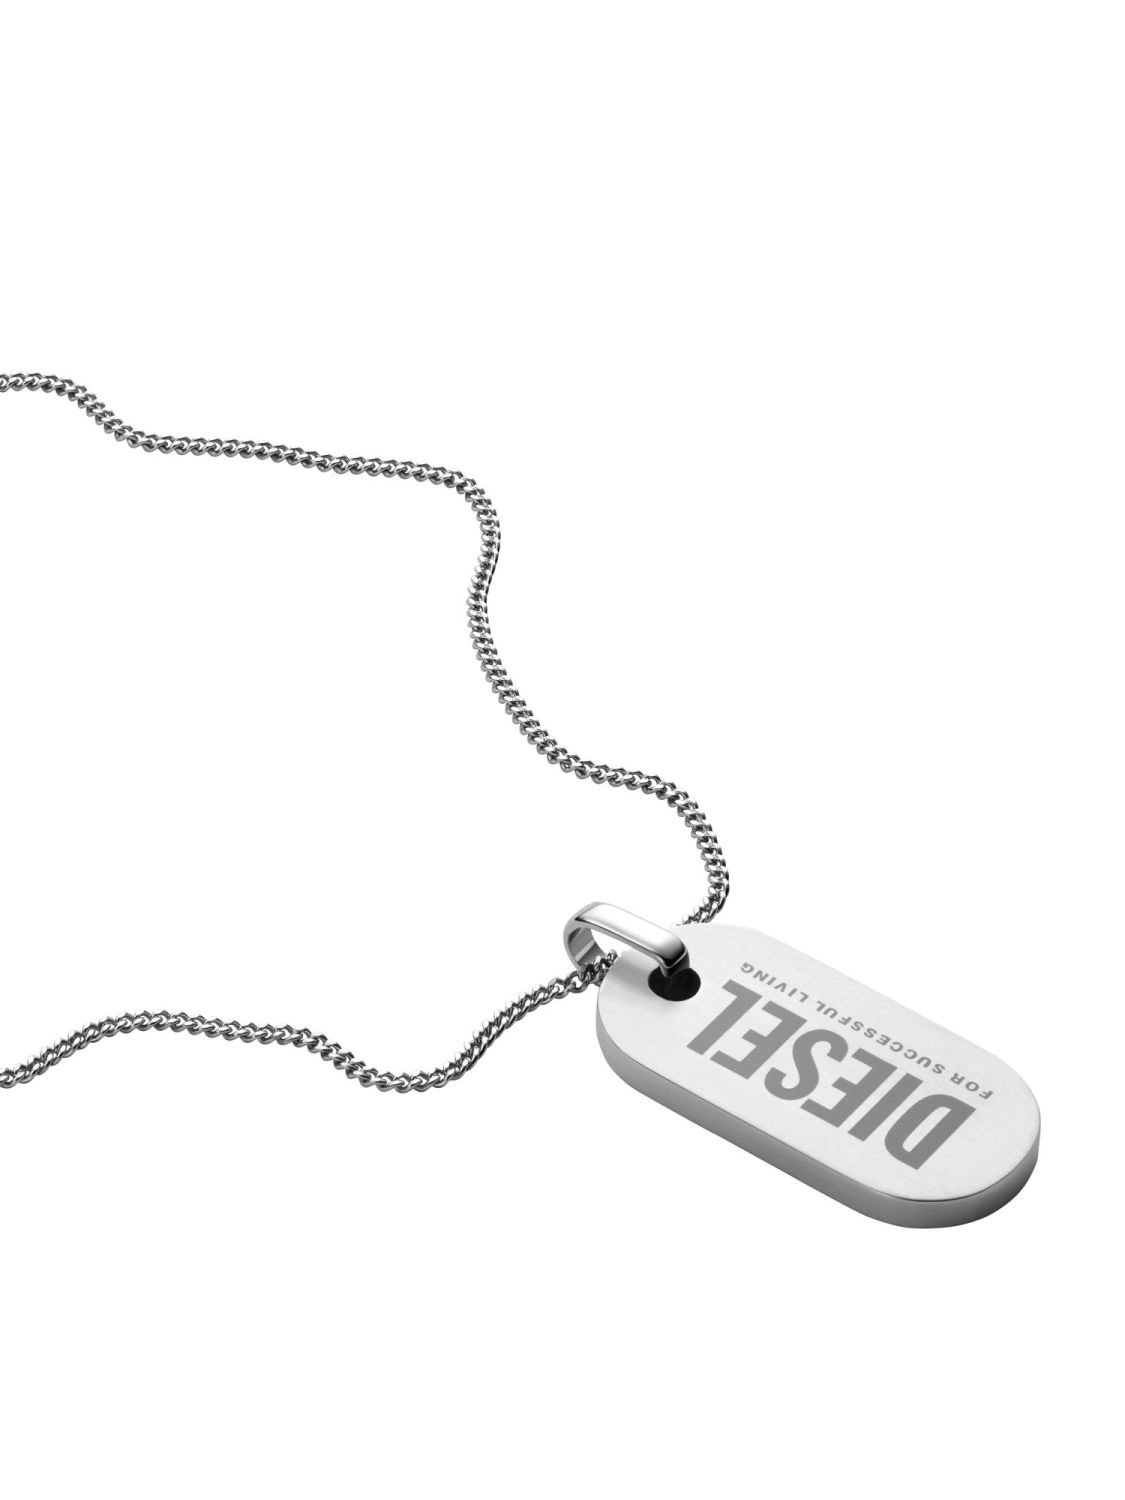 Curb Necklace Diesel with Chain Men\'s Pendant Dog Tag • DX1348040 uhrcenter